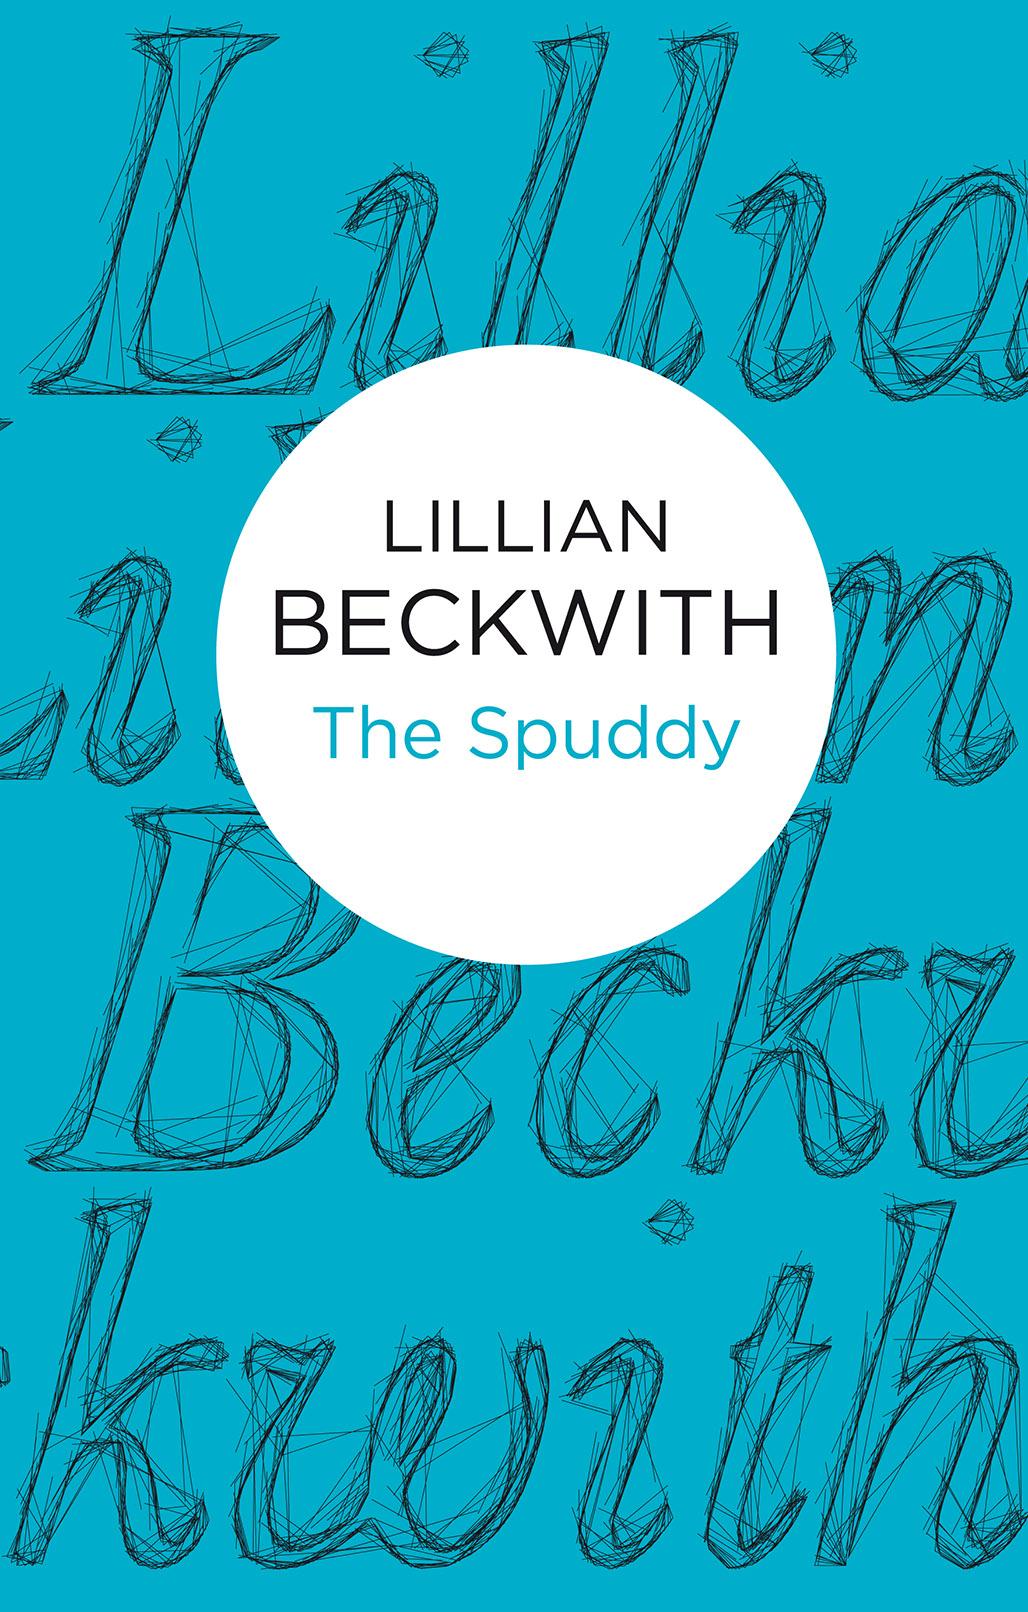 The Spuddy by Lillian Beckwith